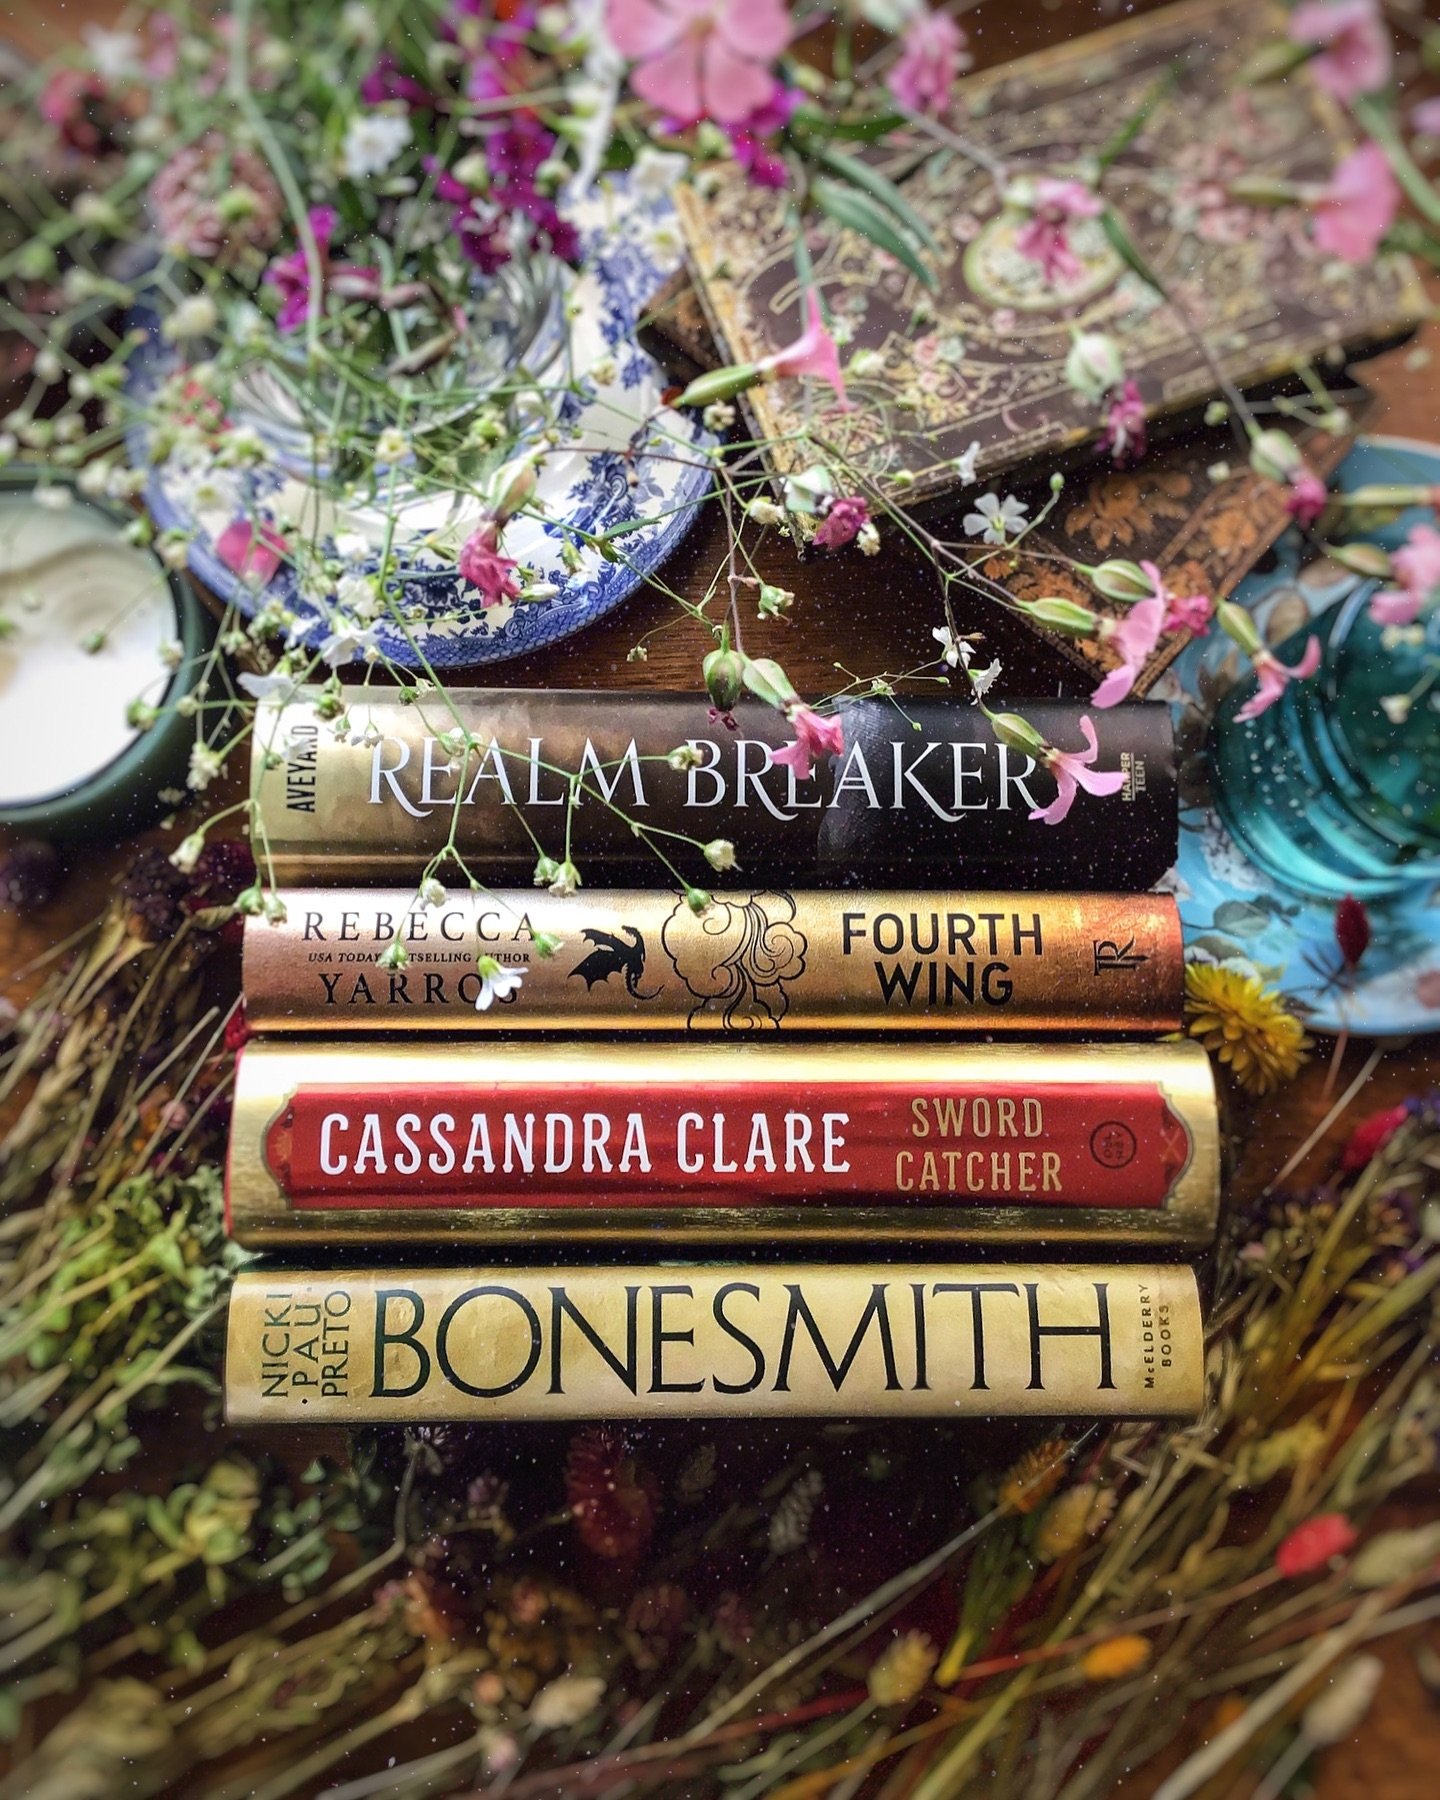 Happy #stacksaturday friends! I hope you all are off to a great weekend start.

My stack is from my TBR shelf and they are all starts to new series! Clearly, I need to read faster and buy slower. 😂

𝐐𝐎𝐓𝐃: 𝐖𝐡𝐚𝐭 𝐚𝐫𝐞 𝐲𝐨𝐮𝐫 𝐩𝐥𝐚𝐧𝐬 𝐟𝐨